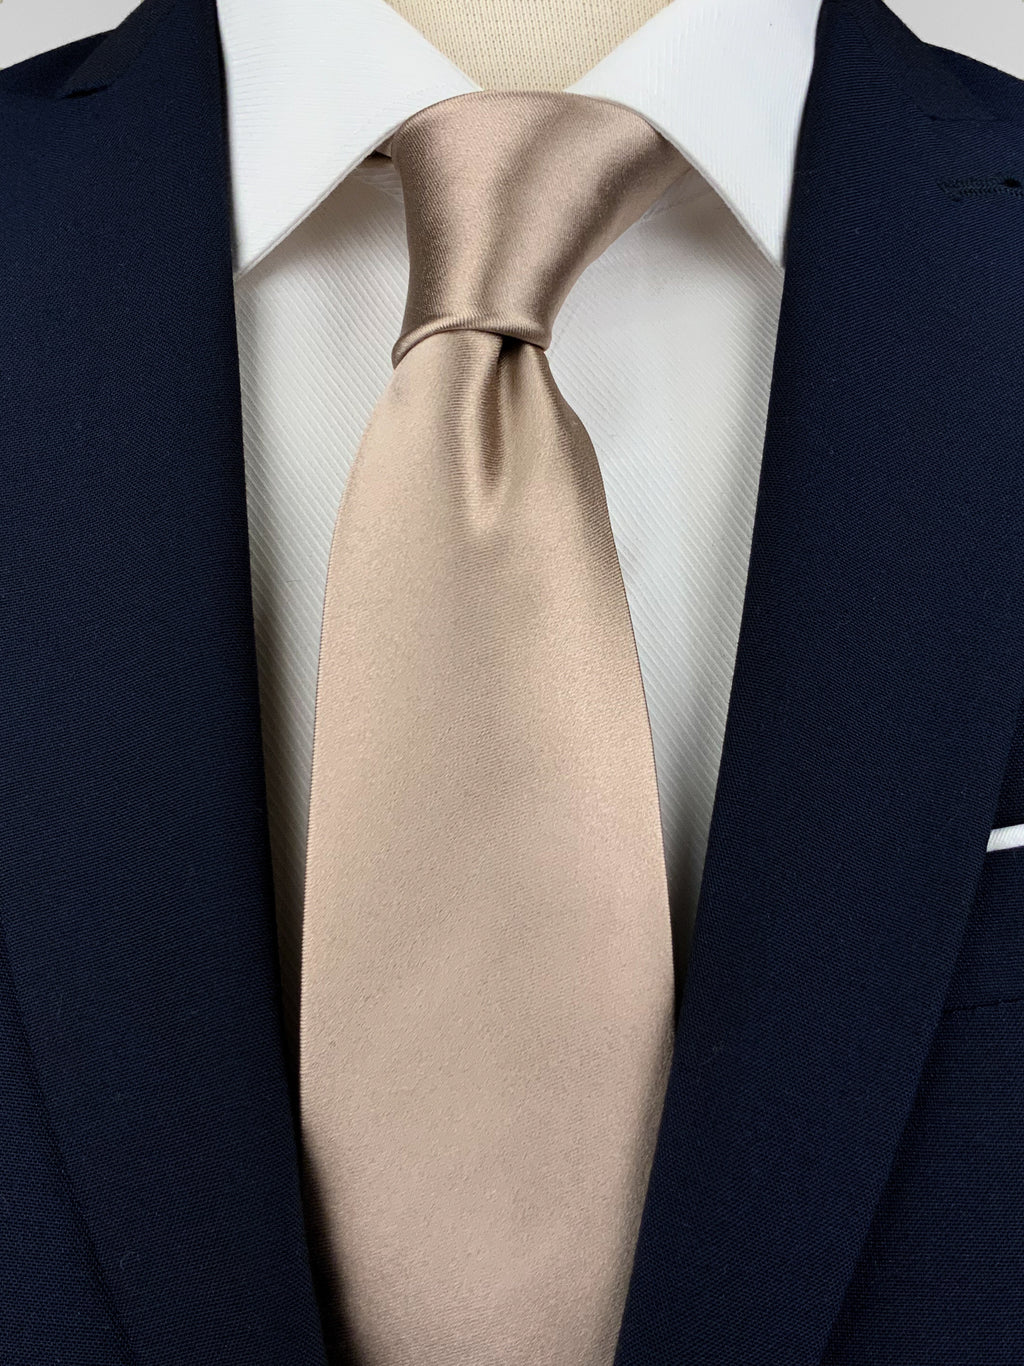 Light gold mulberry silk satin tie worn with a white shirt and a navy blue suit